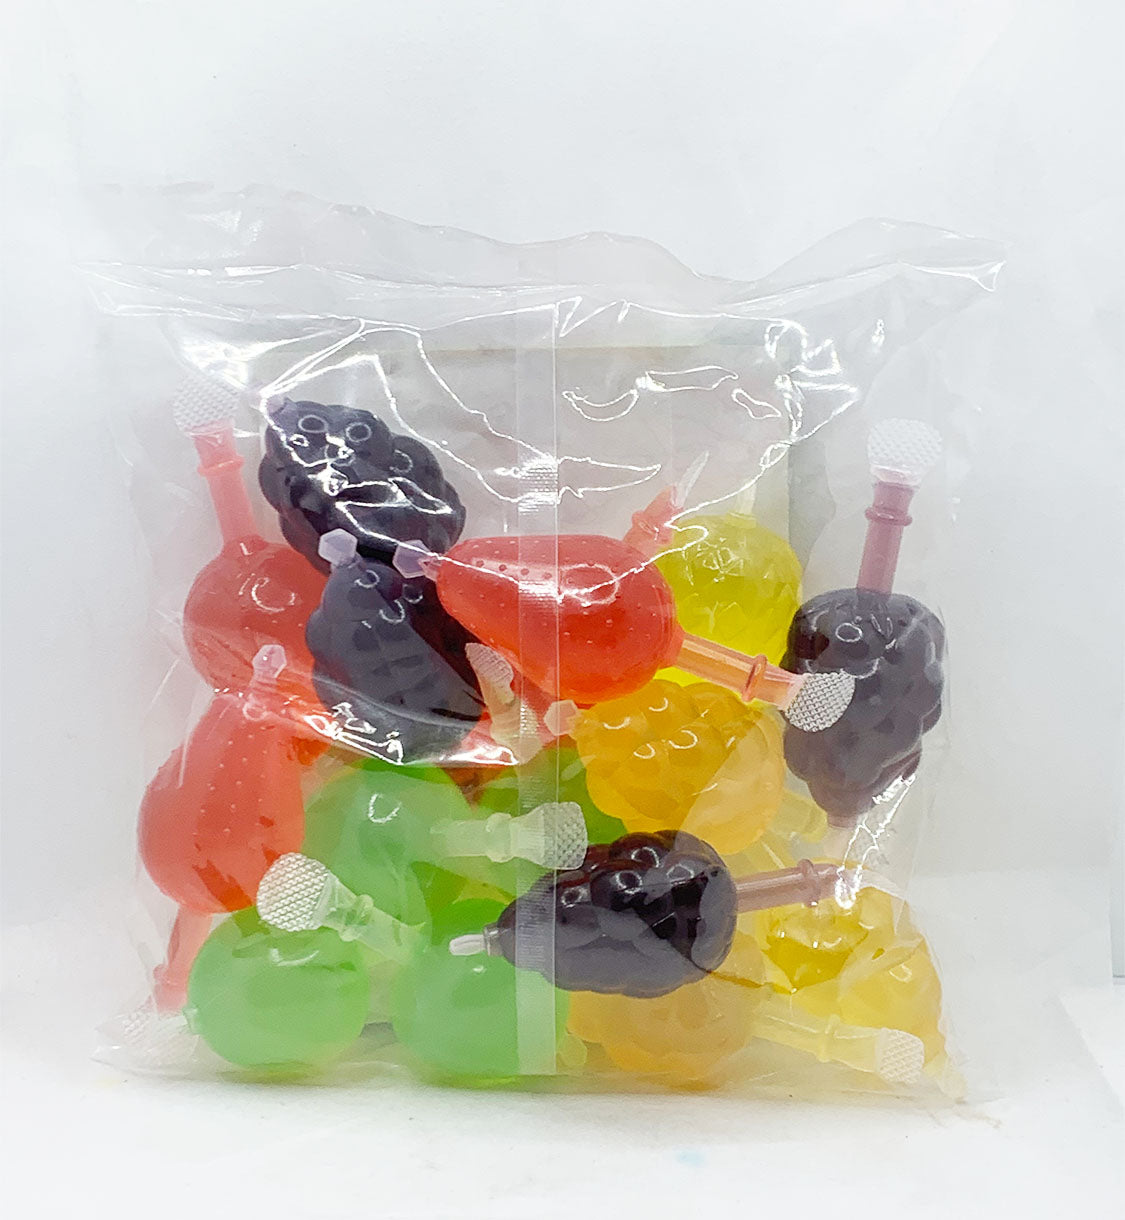 Jelly Pop Fruit-Licious Gels